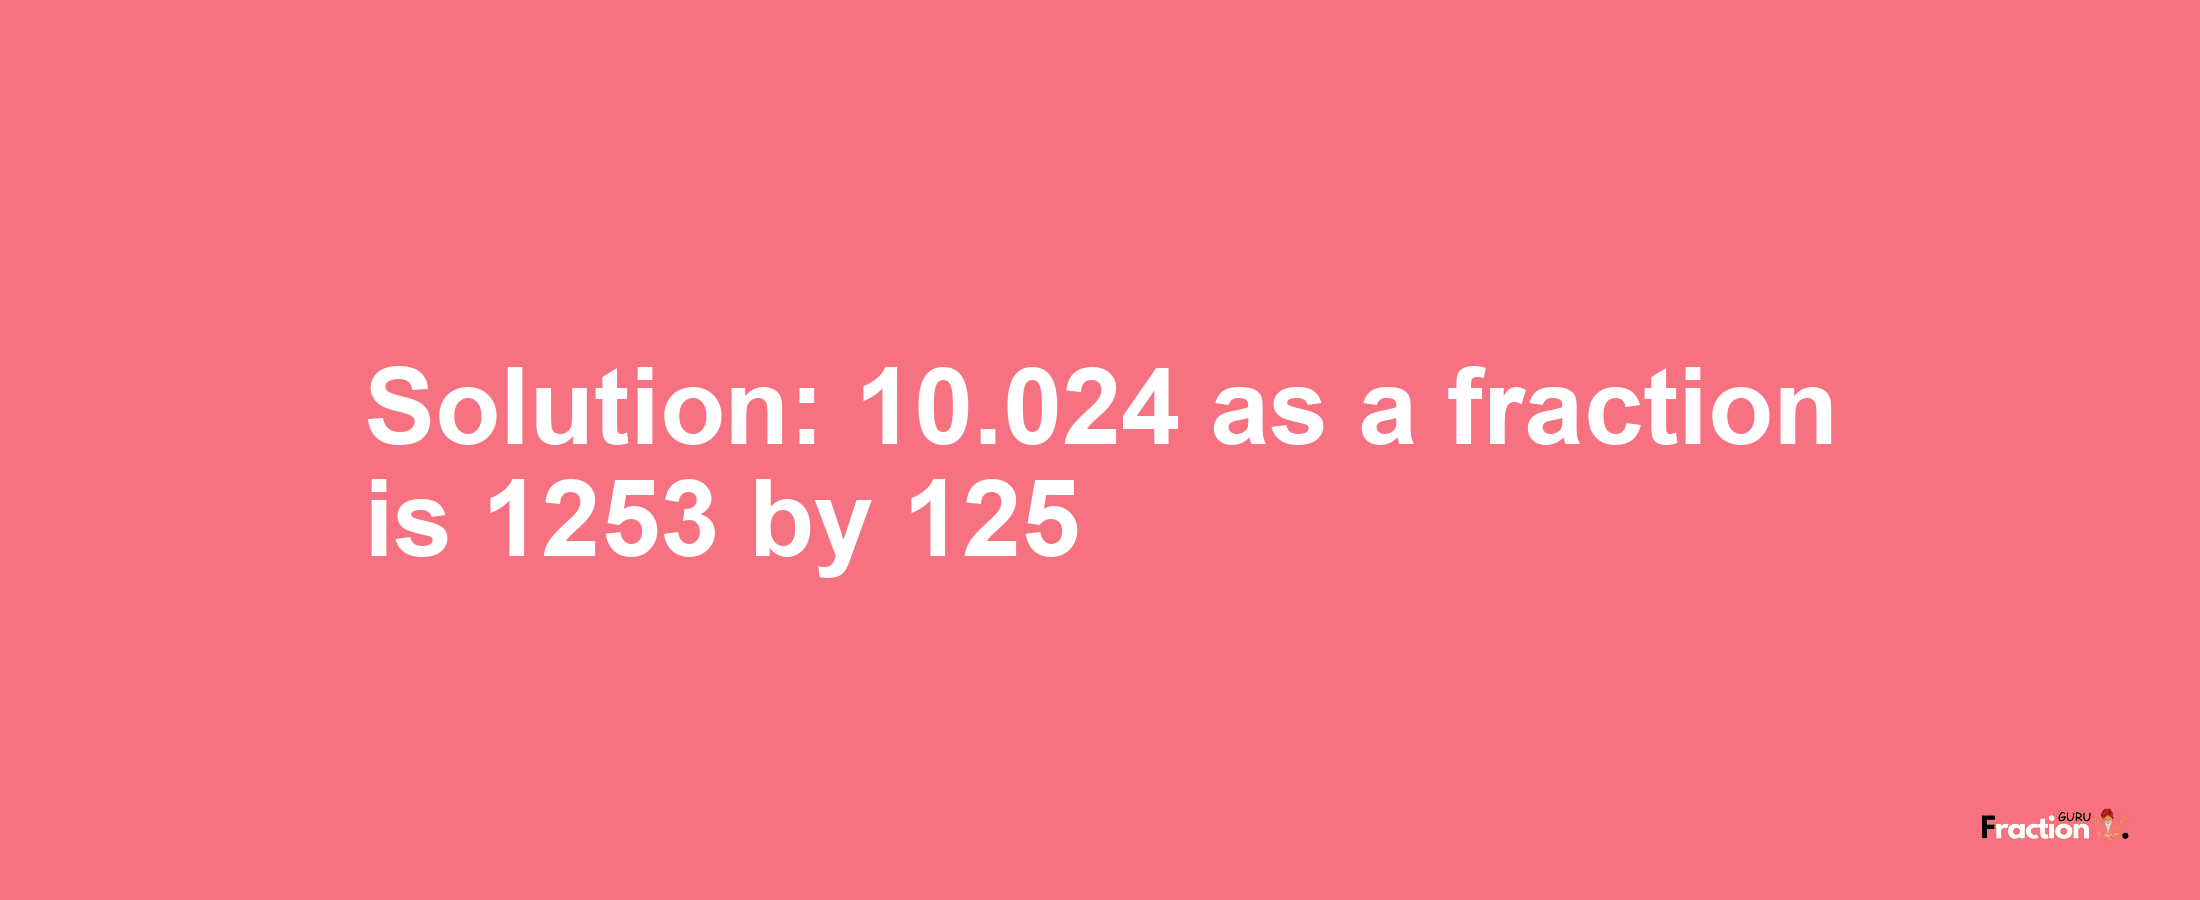 Solution:10.024 as a fraction is 1253/125